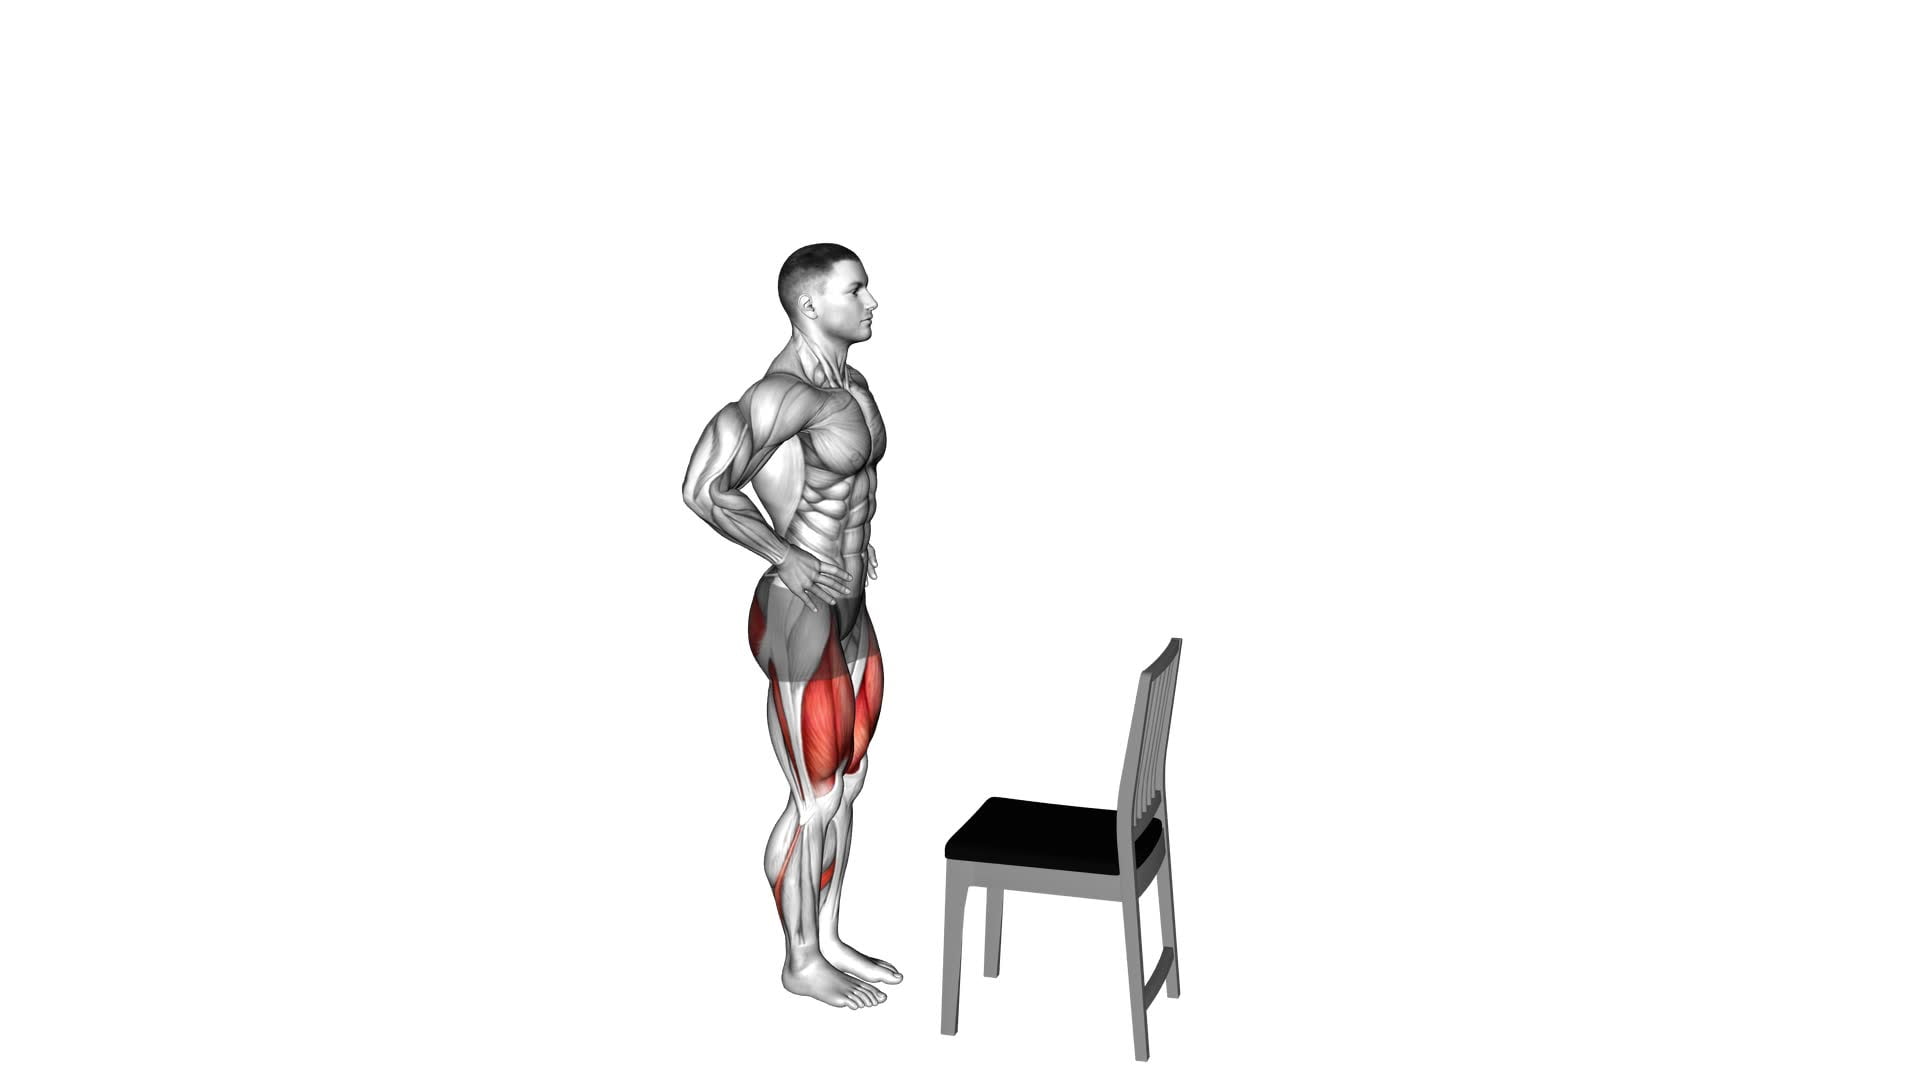 Step-up on Chair (VERSION 2) - Video Exercise Guide & Tips